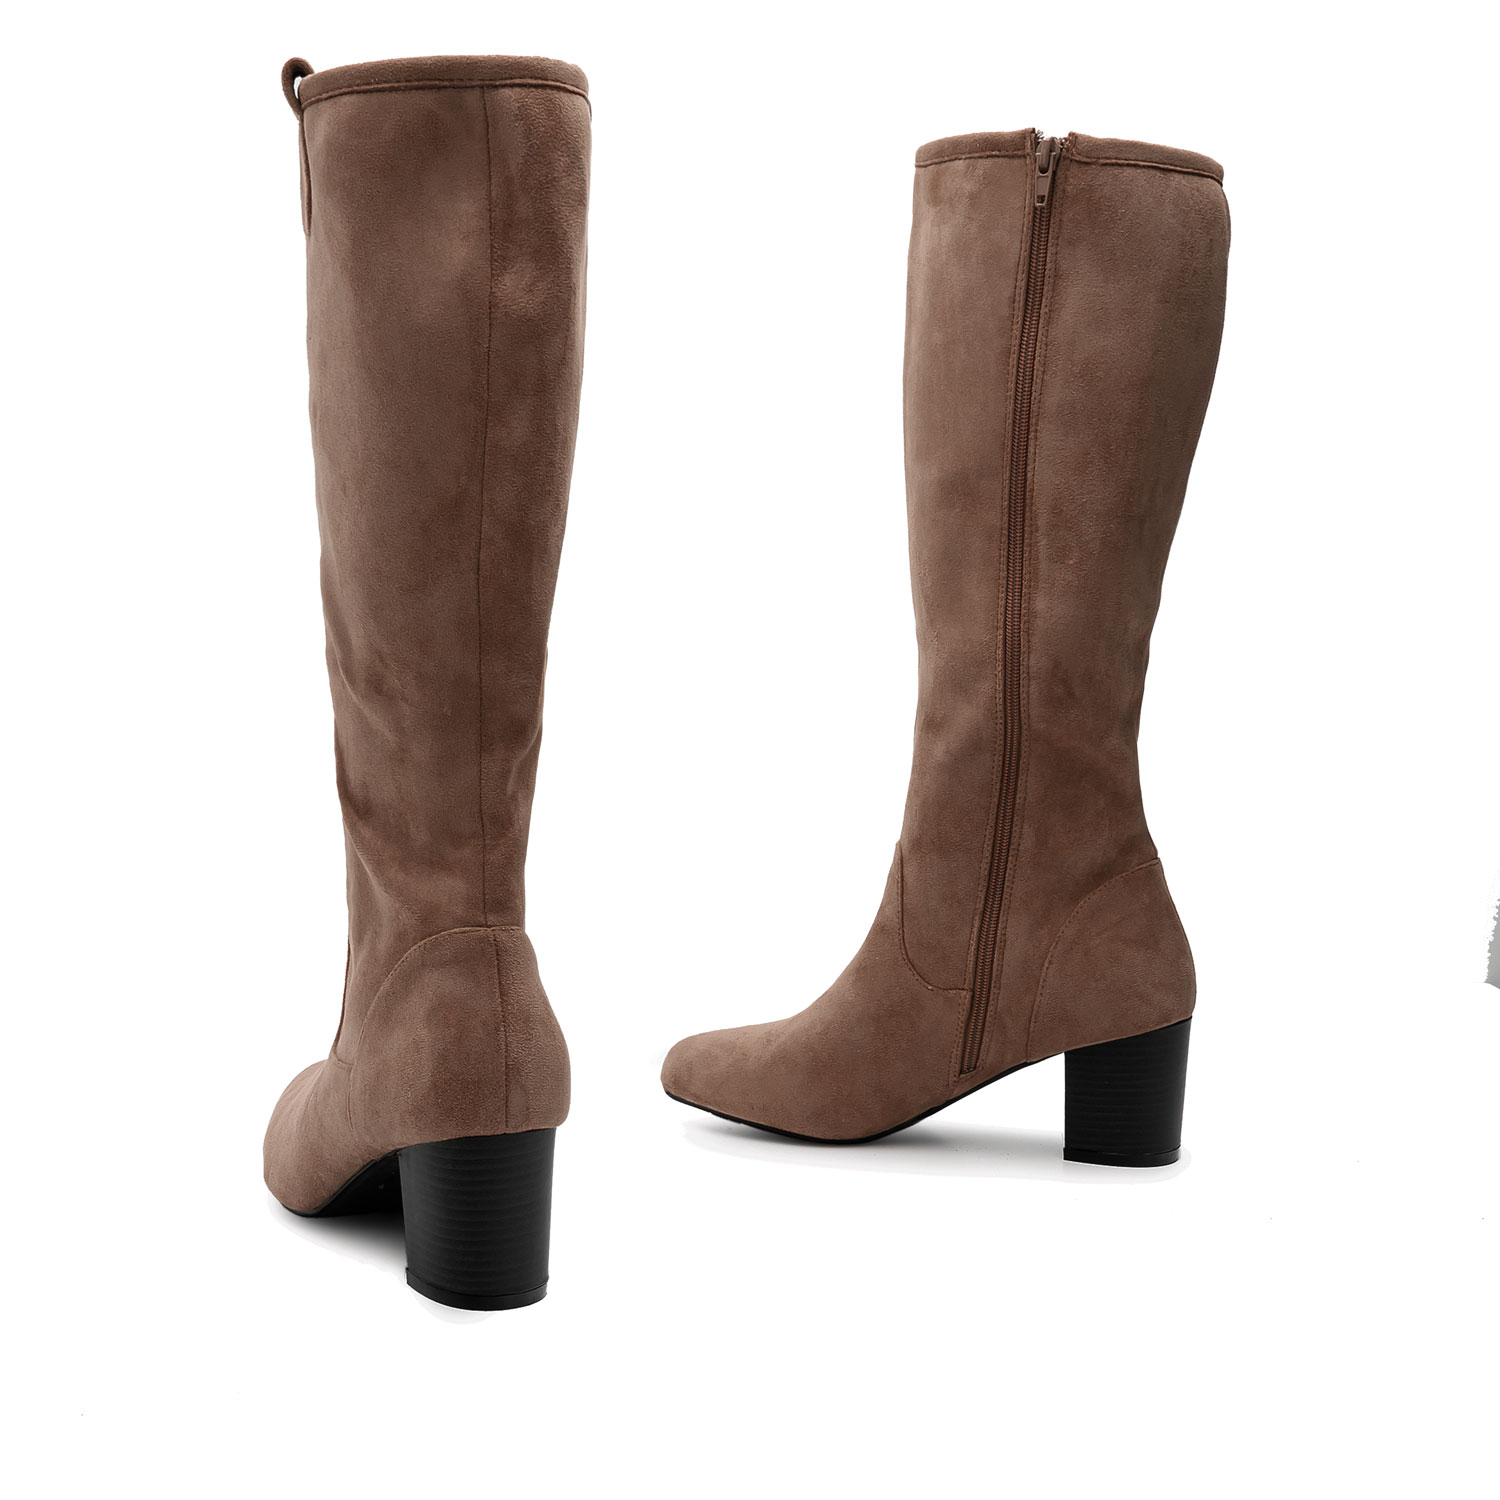 High Calf Boots in Taupe Suedette 